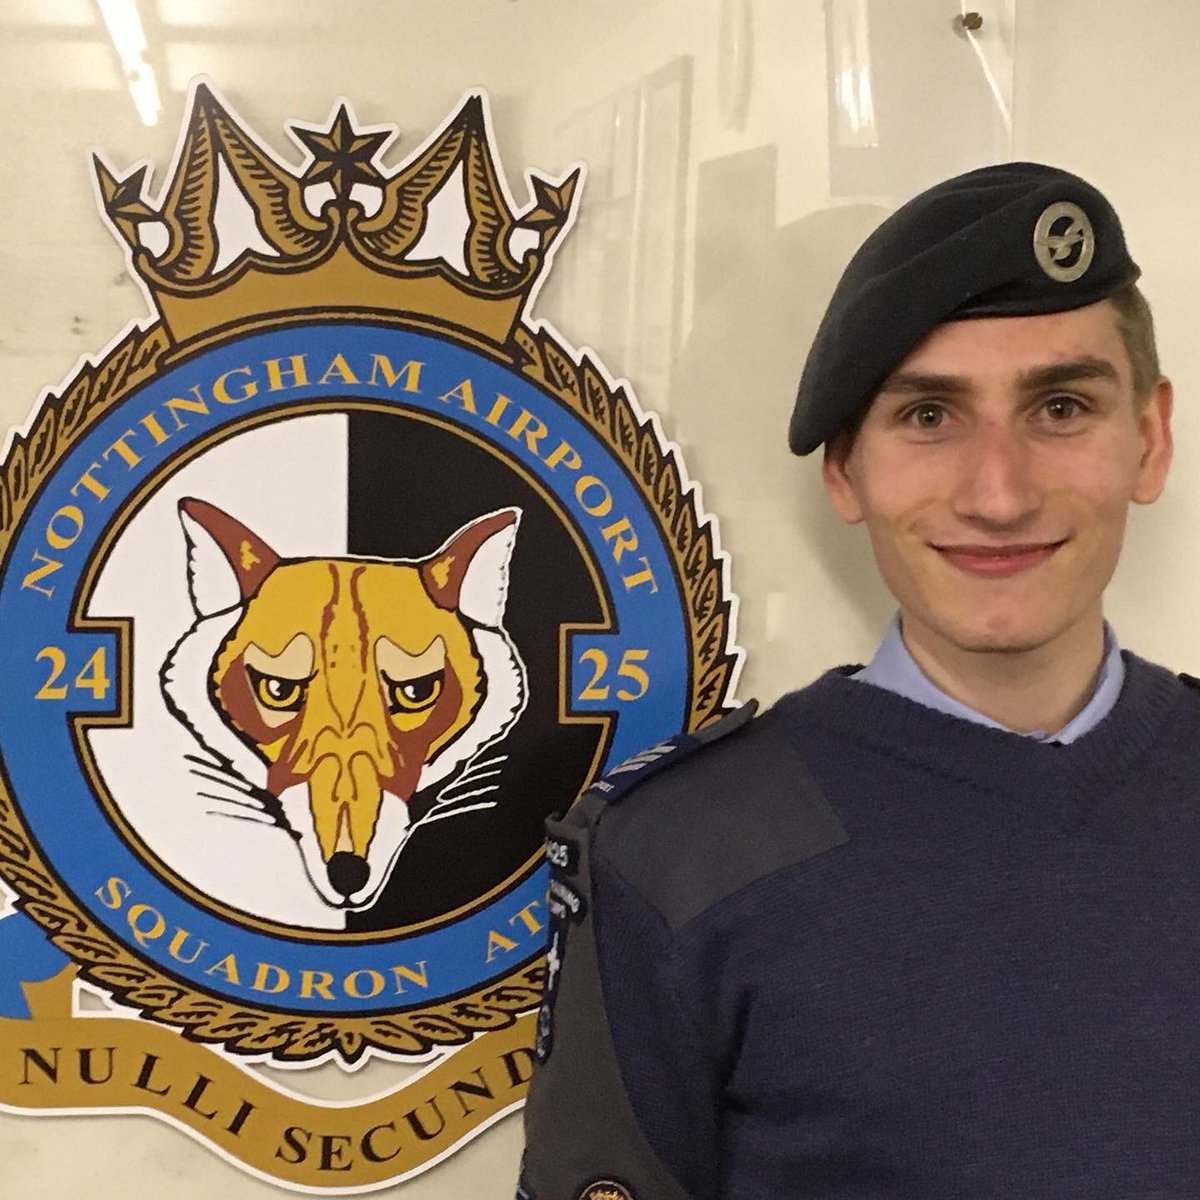 Last night saw, after 7 years of commitment to @2425AirCadets we said goodbye to FS Goddard and thanked him for all his efforts. Looking forward to imminently welcoming Mr Goddard back as part of the staff team. #commitment #rafac #aircadets